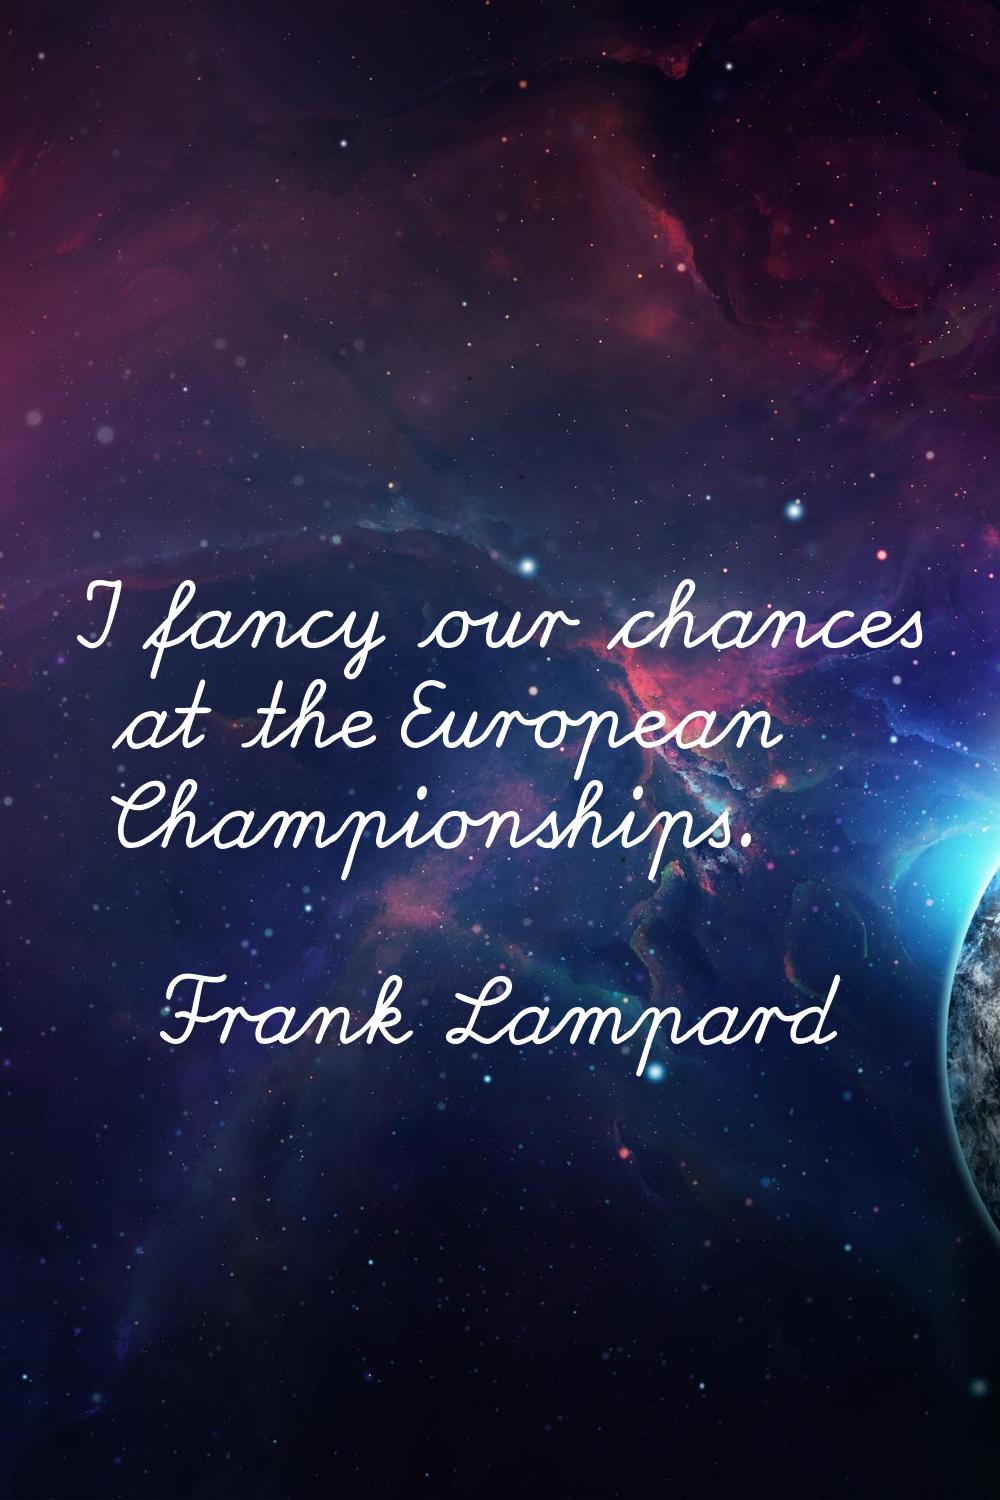 I fancy our chances at the European Championships.